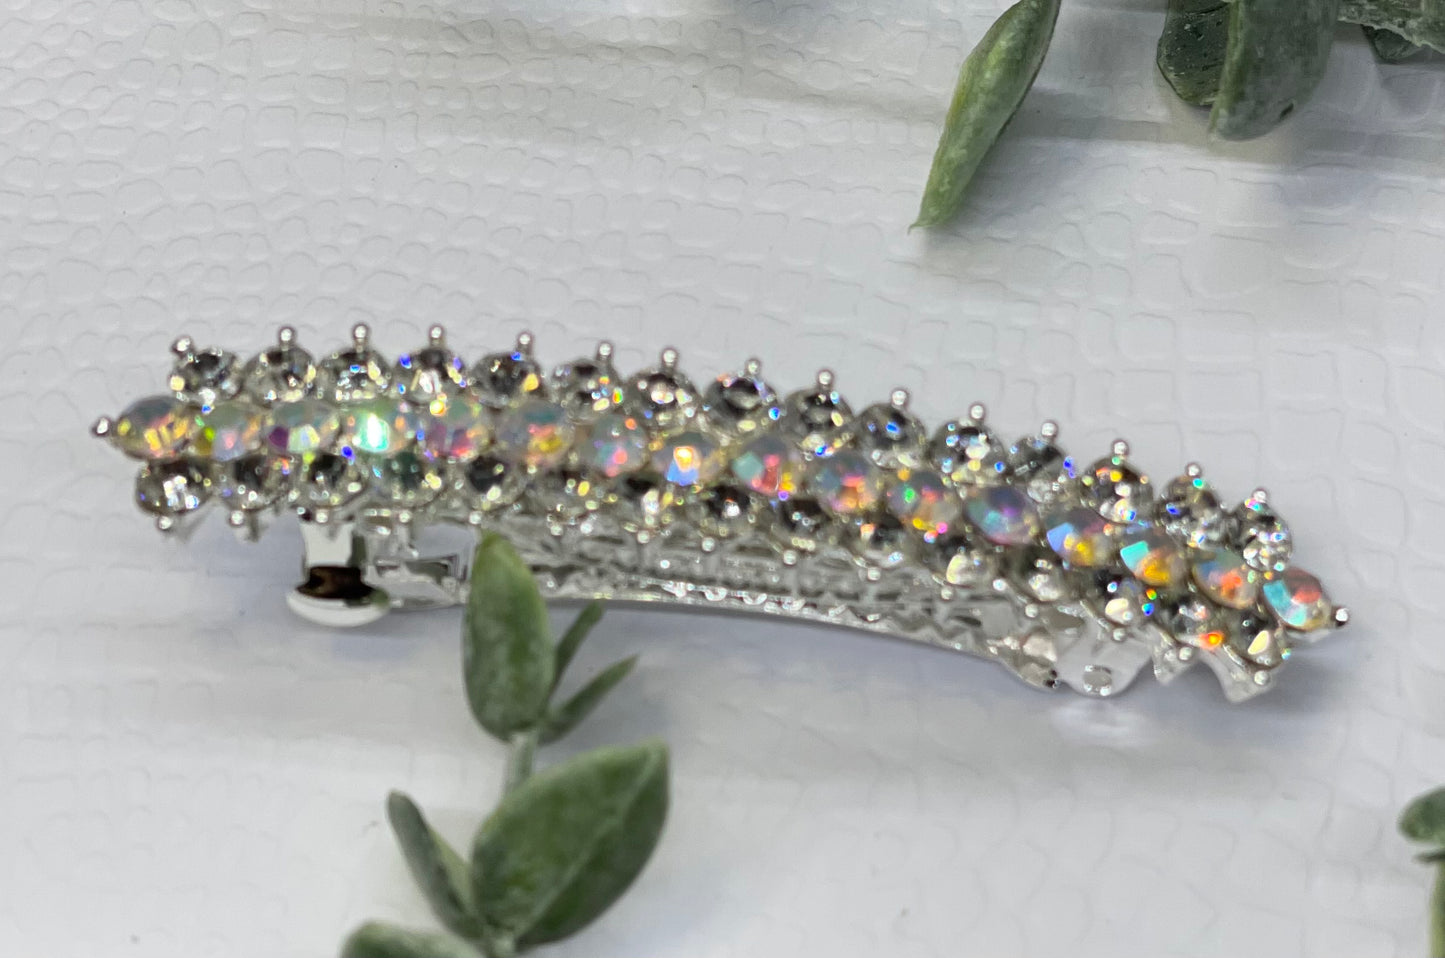 Irridescent Crystal rhinestone barrette approximately 3.0” silver tone formal hair accessories gift wedding bridesmaid